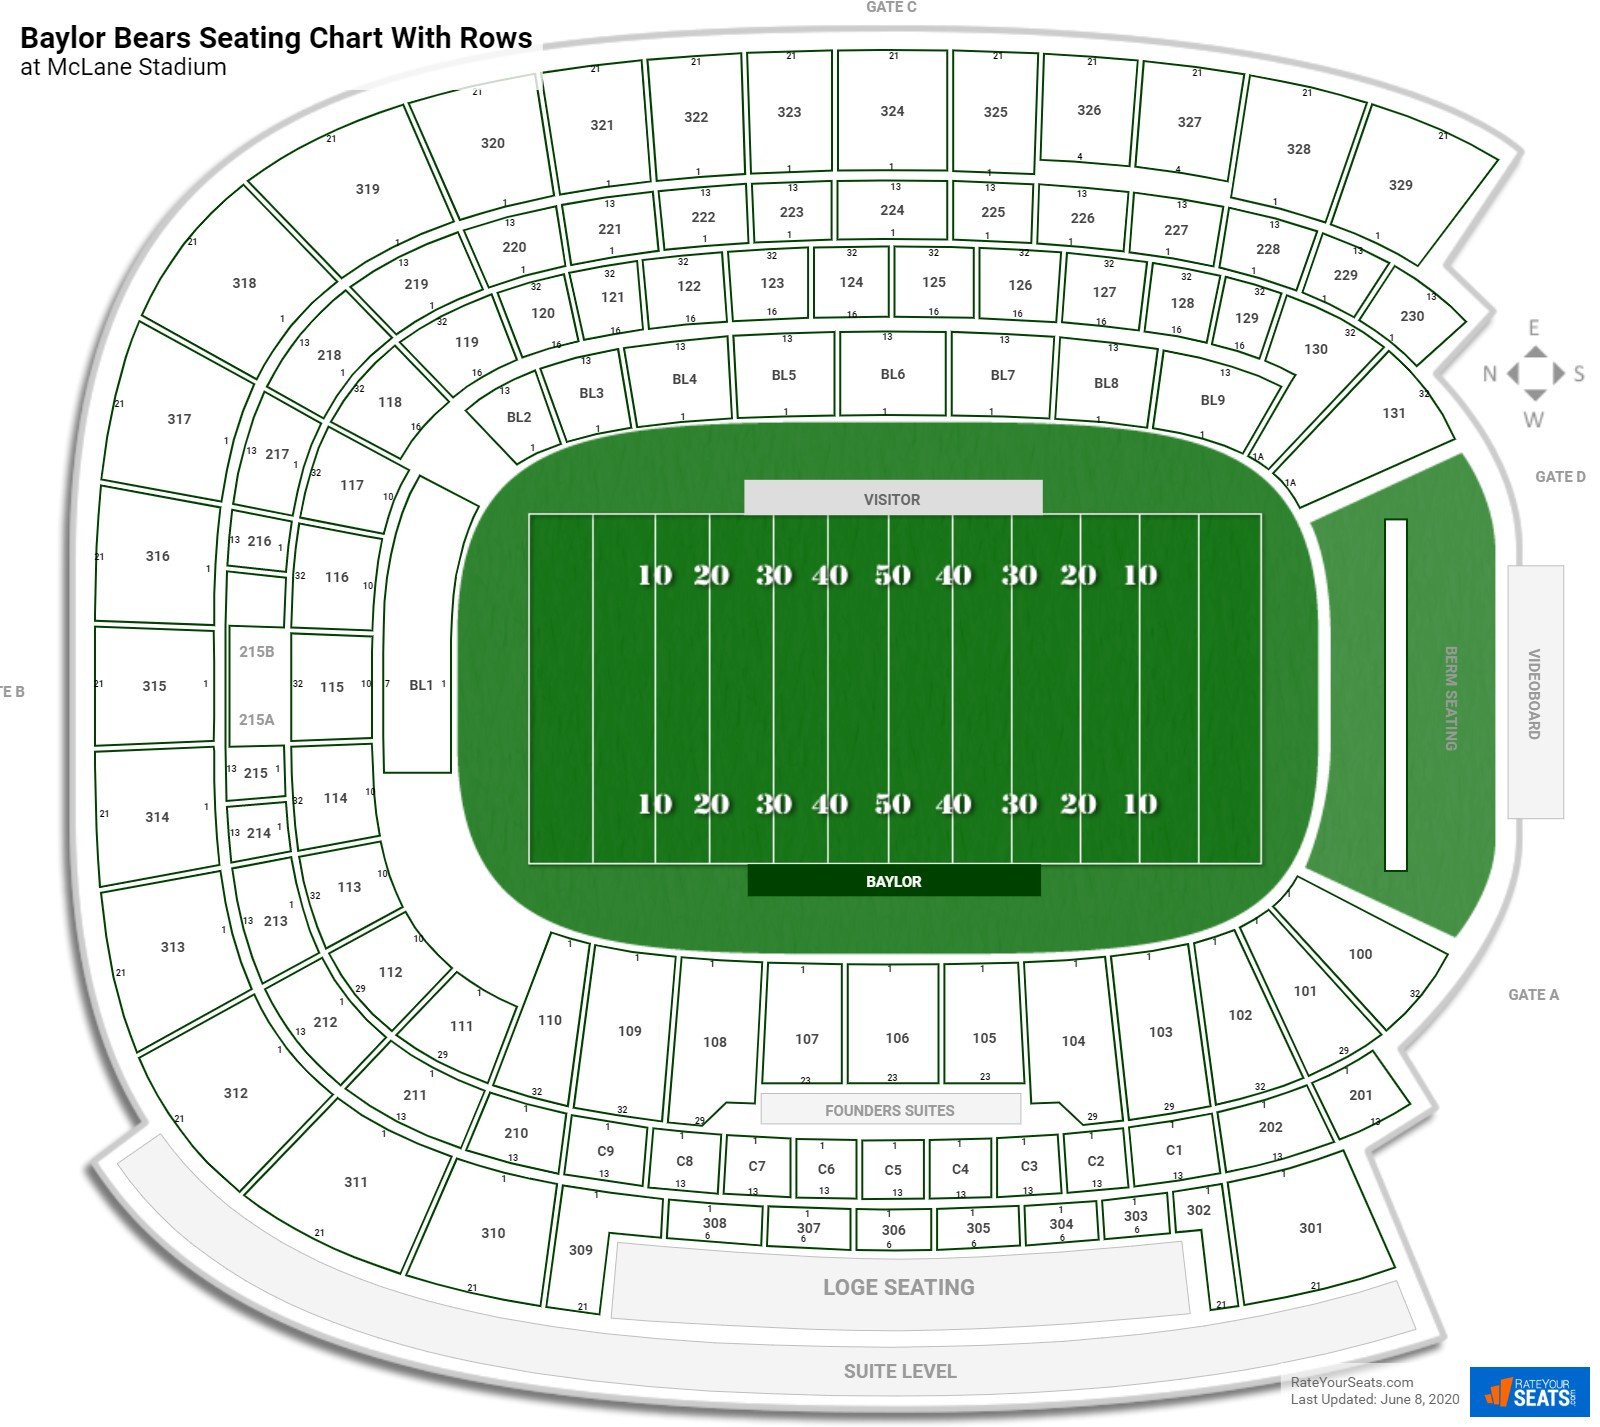 McLane Stadium seating chart with row numbers